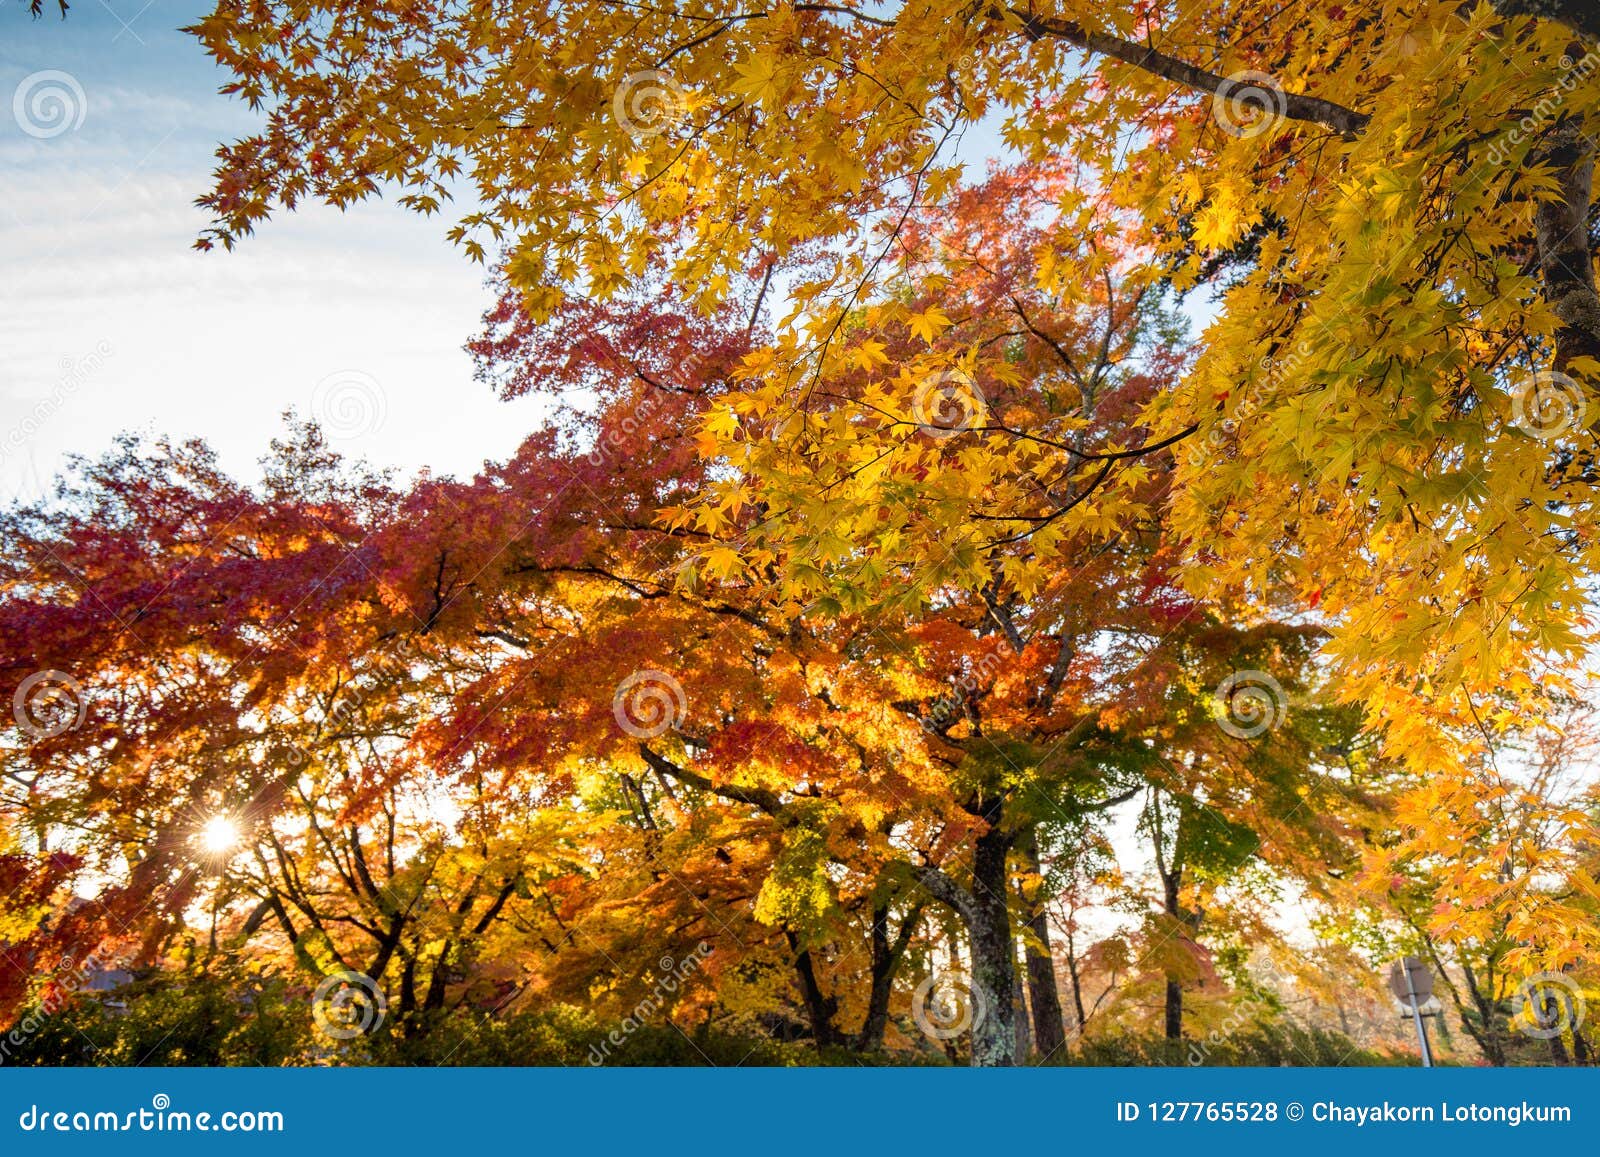 Fall Autumn Leaves on Trees in Japan Stock Photo - Image of leaves ...